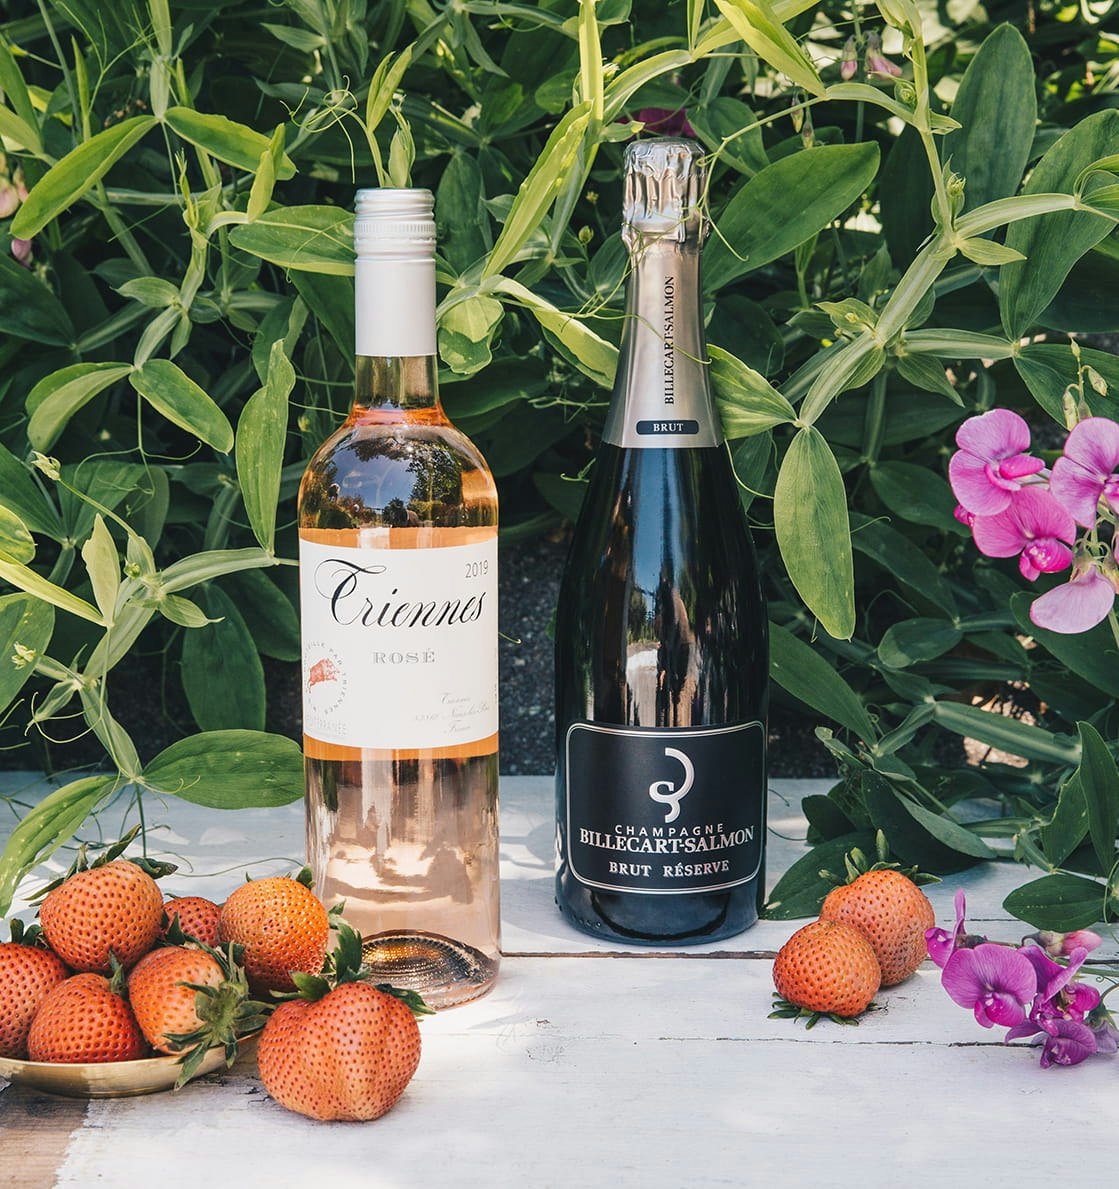 Driscoll's rose berries and wine pairings